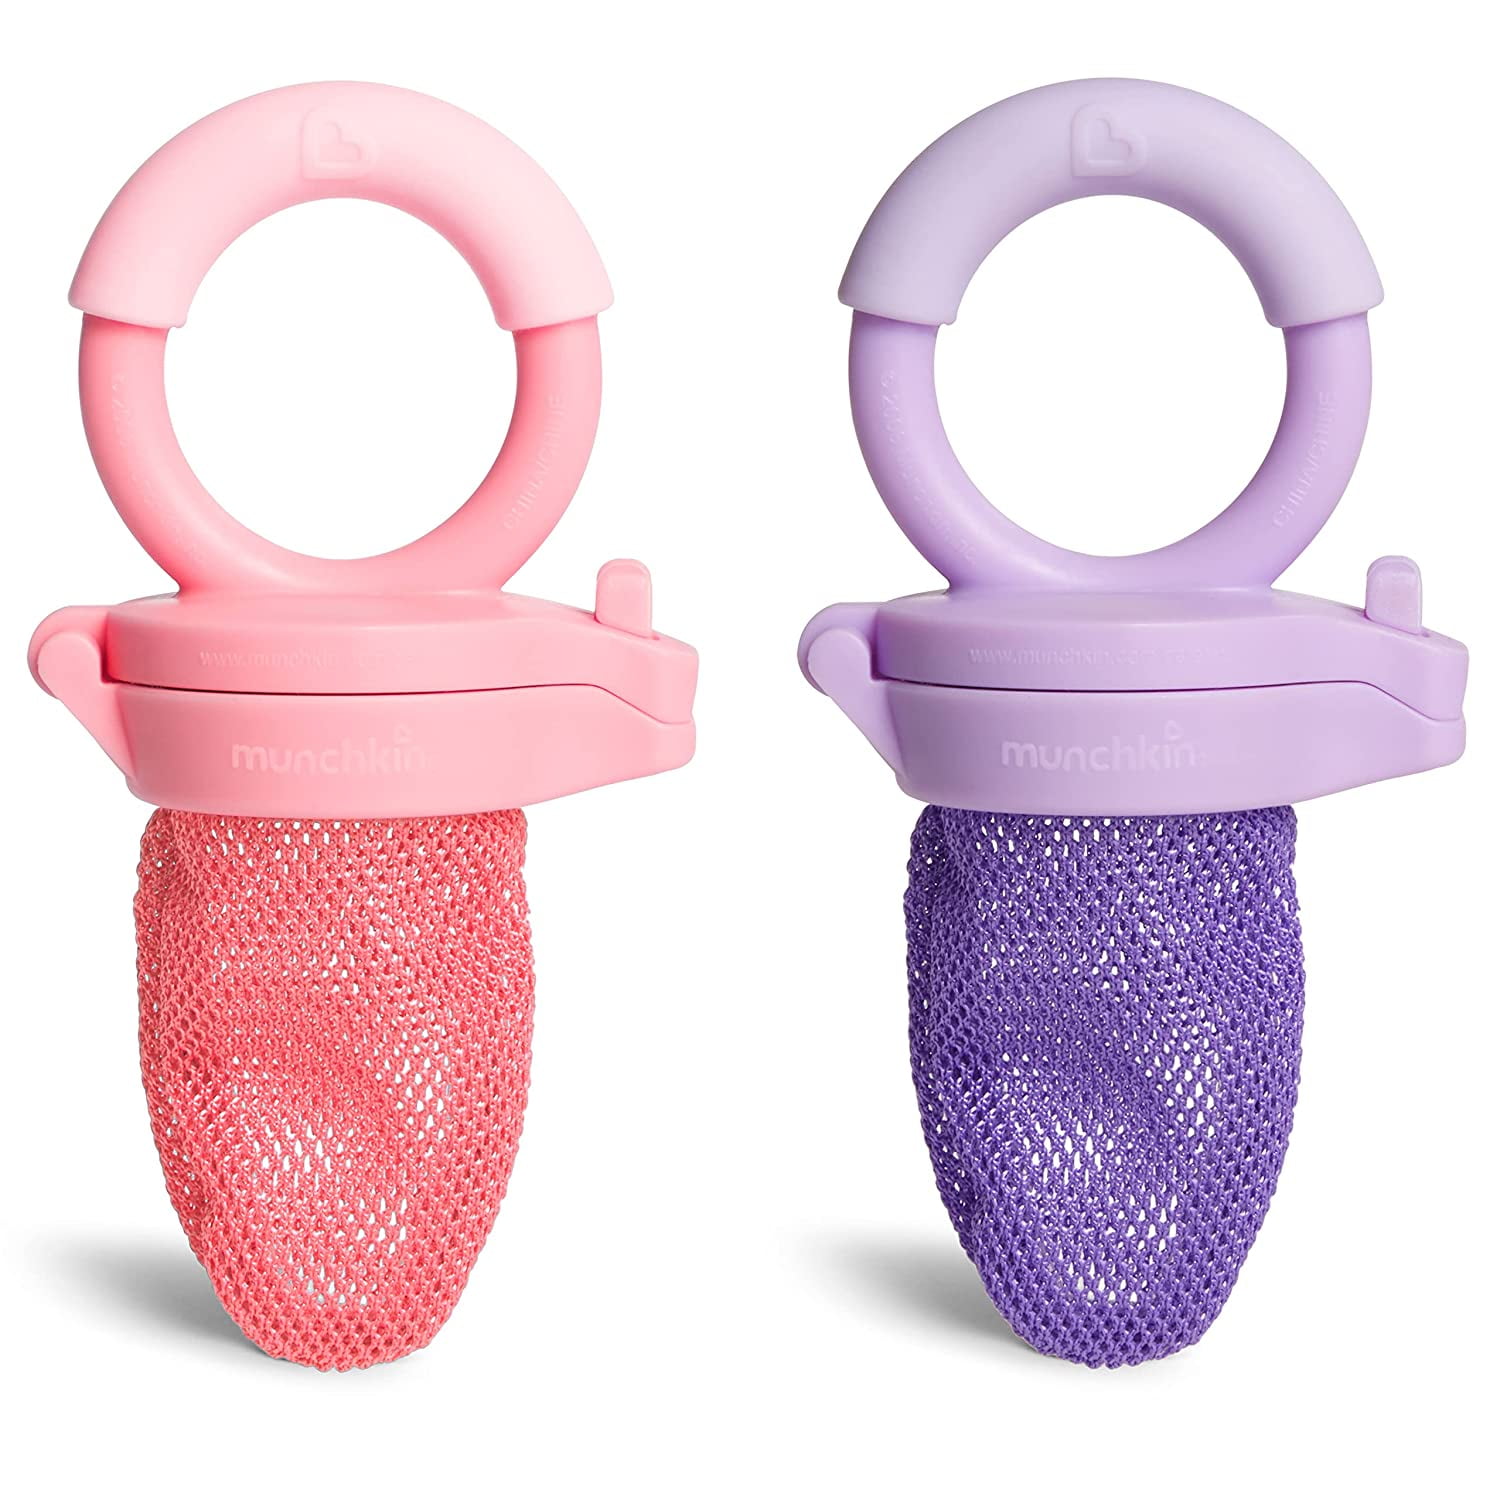 Munchkin Fresh Food Feeder, Coral/Purple, 2 count (Pack of 1